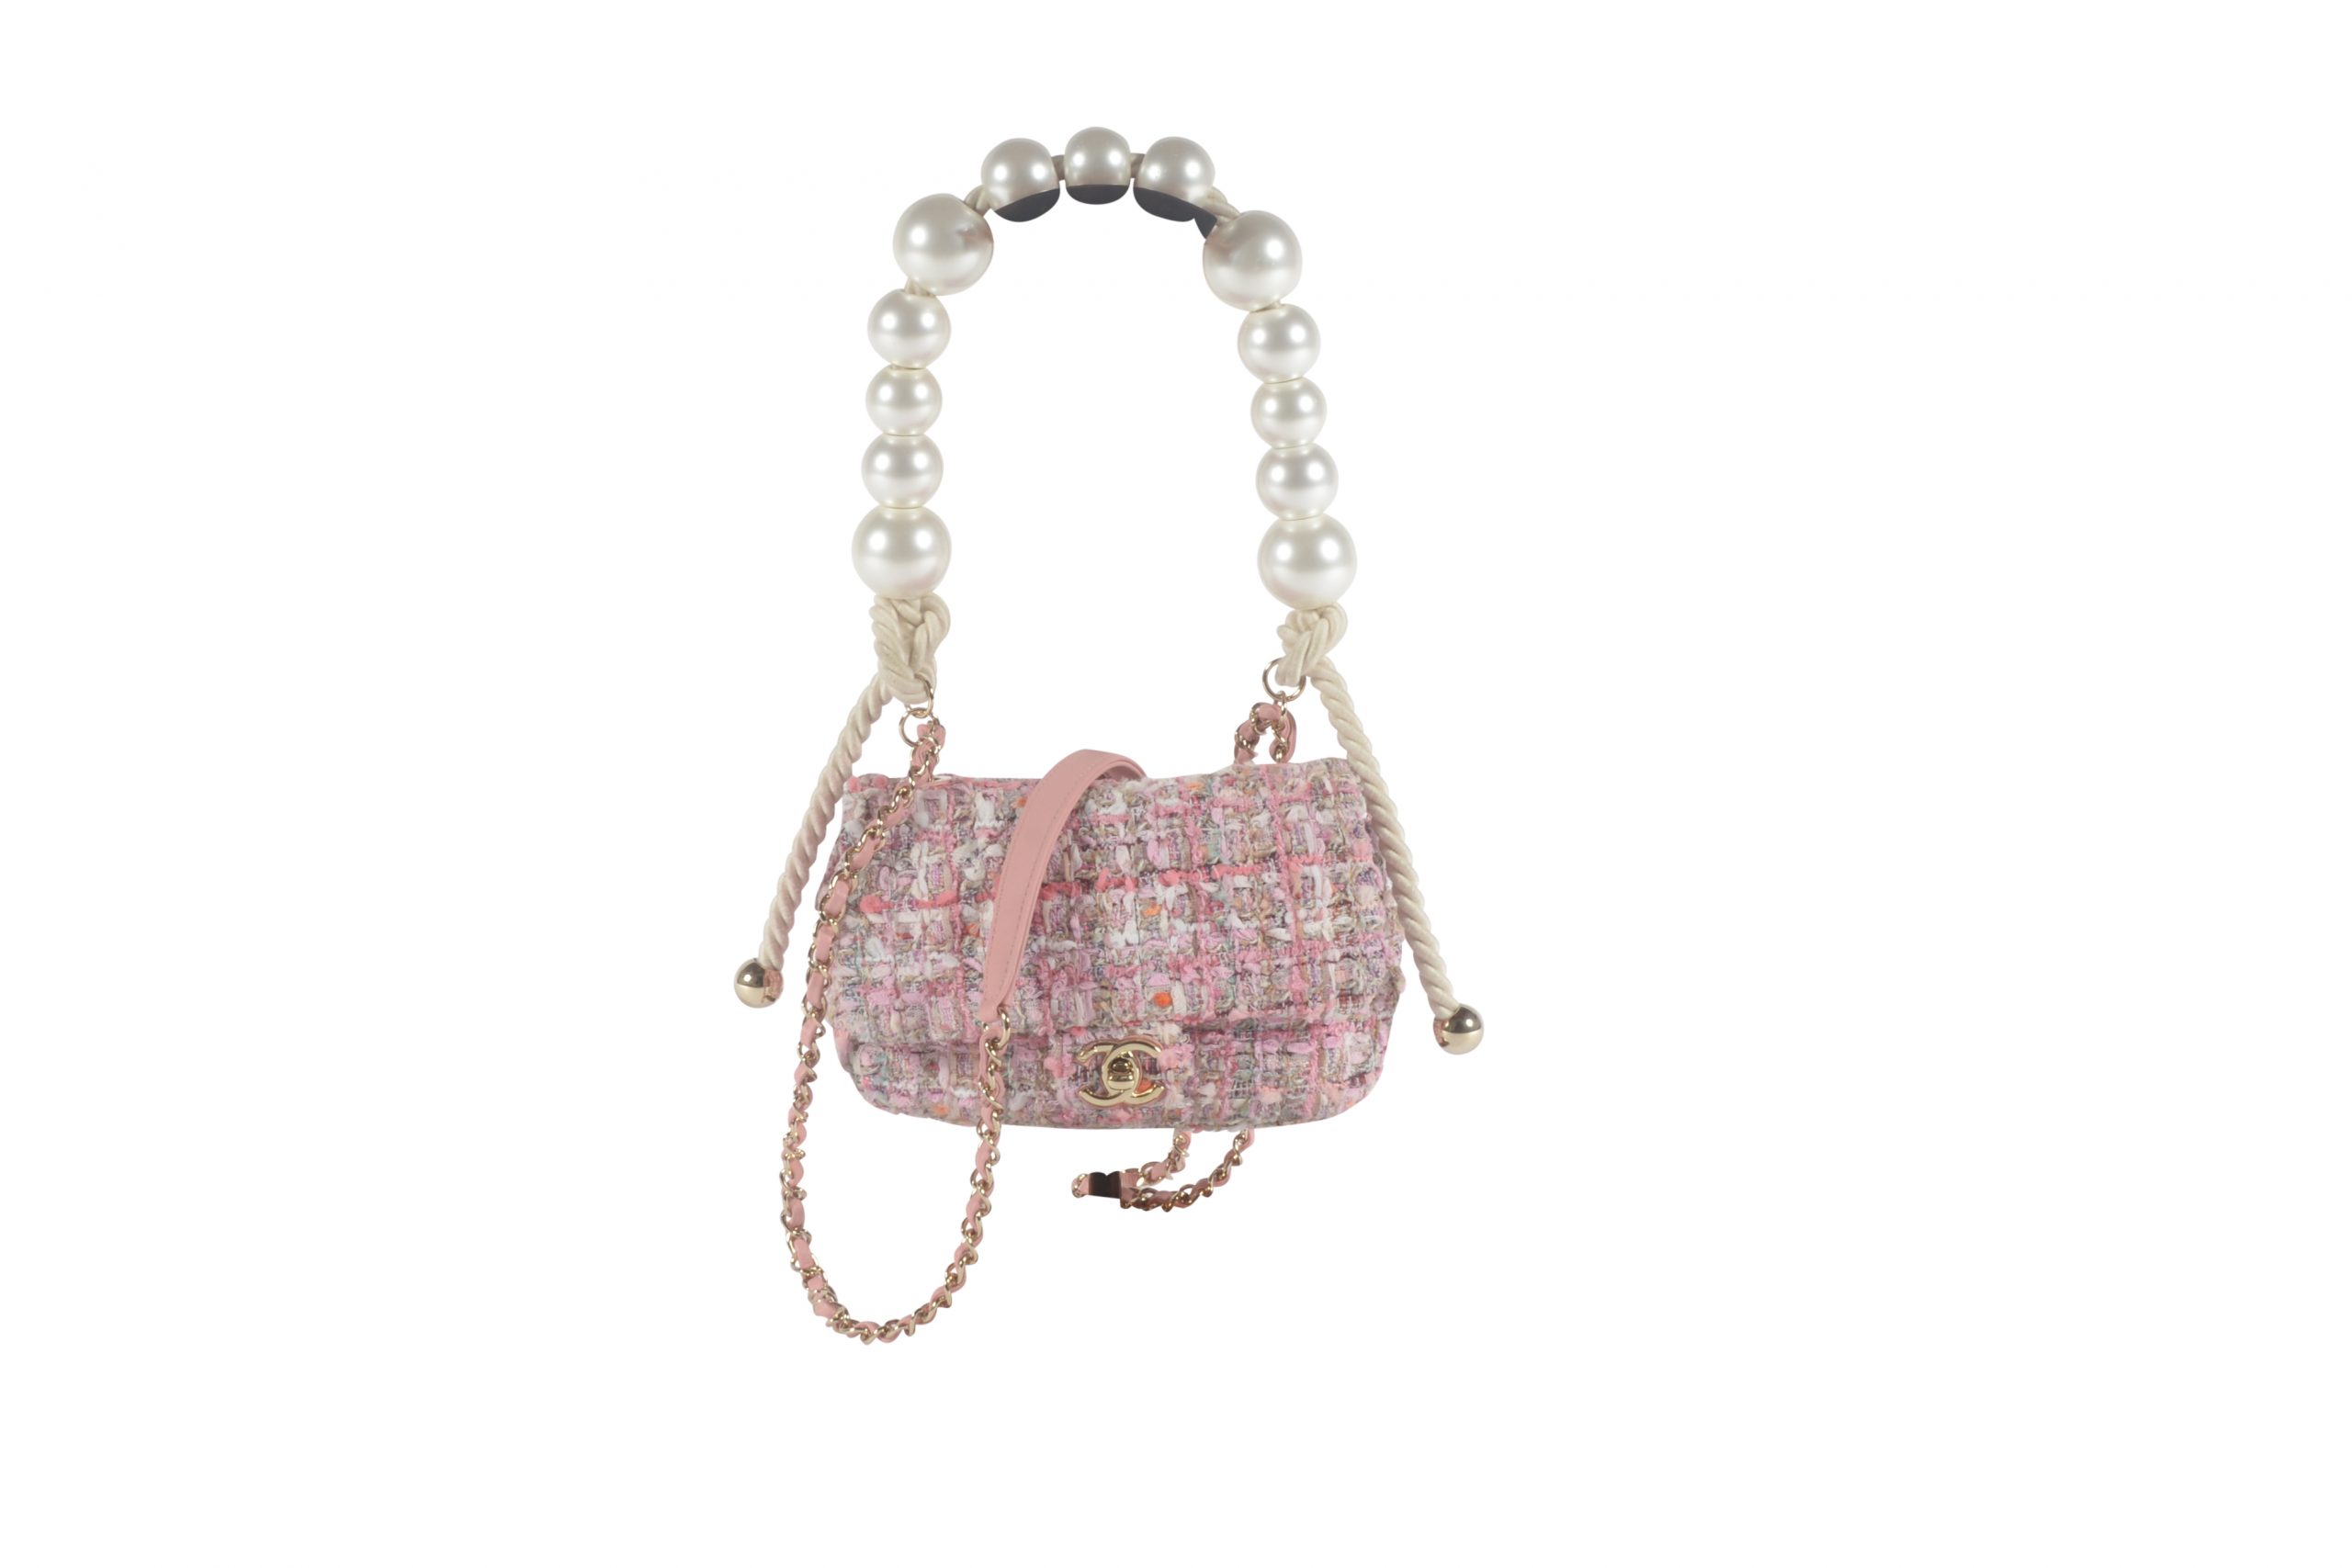 Classic Jumbo Pearl Handle Quilted Jelly Handbags w/Golden Chain Strap –  Aura In Pink Inc.